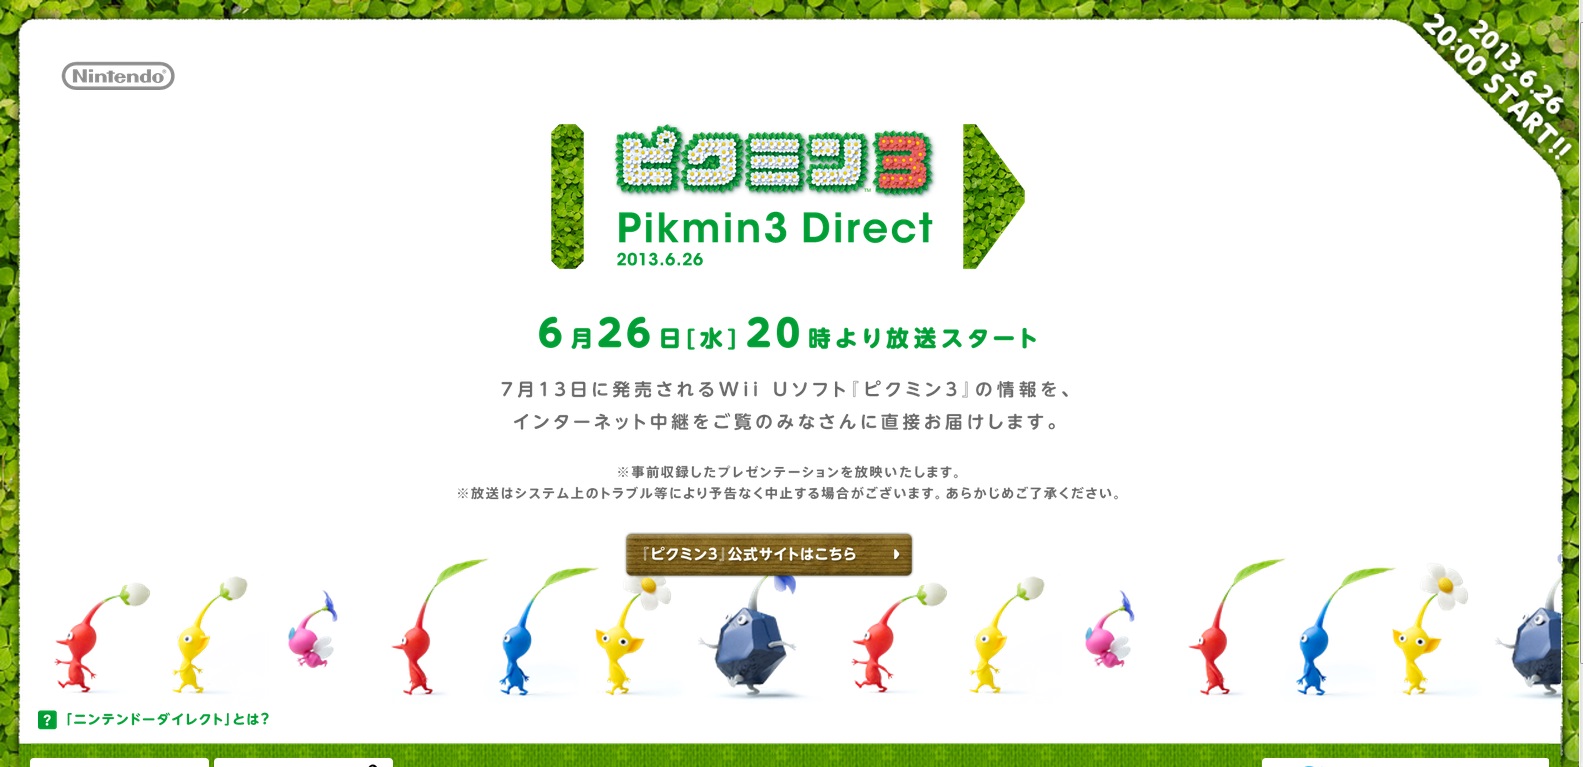 Nintendo to hold Japanese Nintendo Direct to focus on Pikmin 3